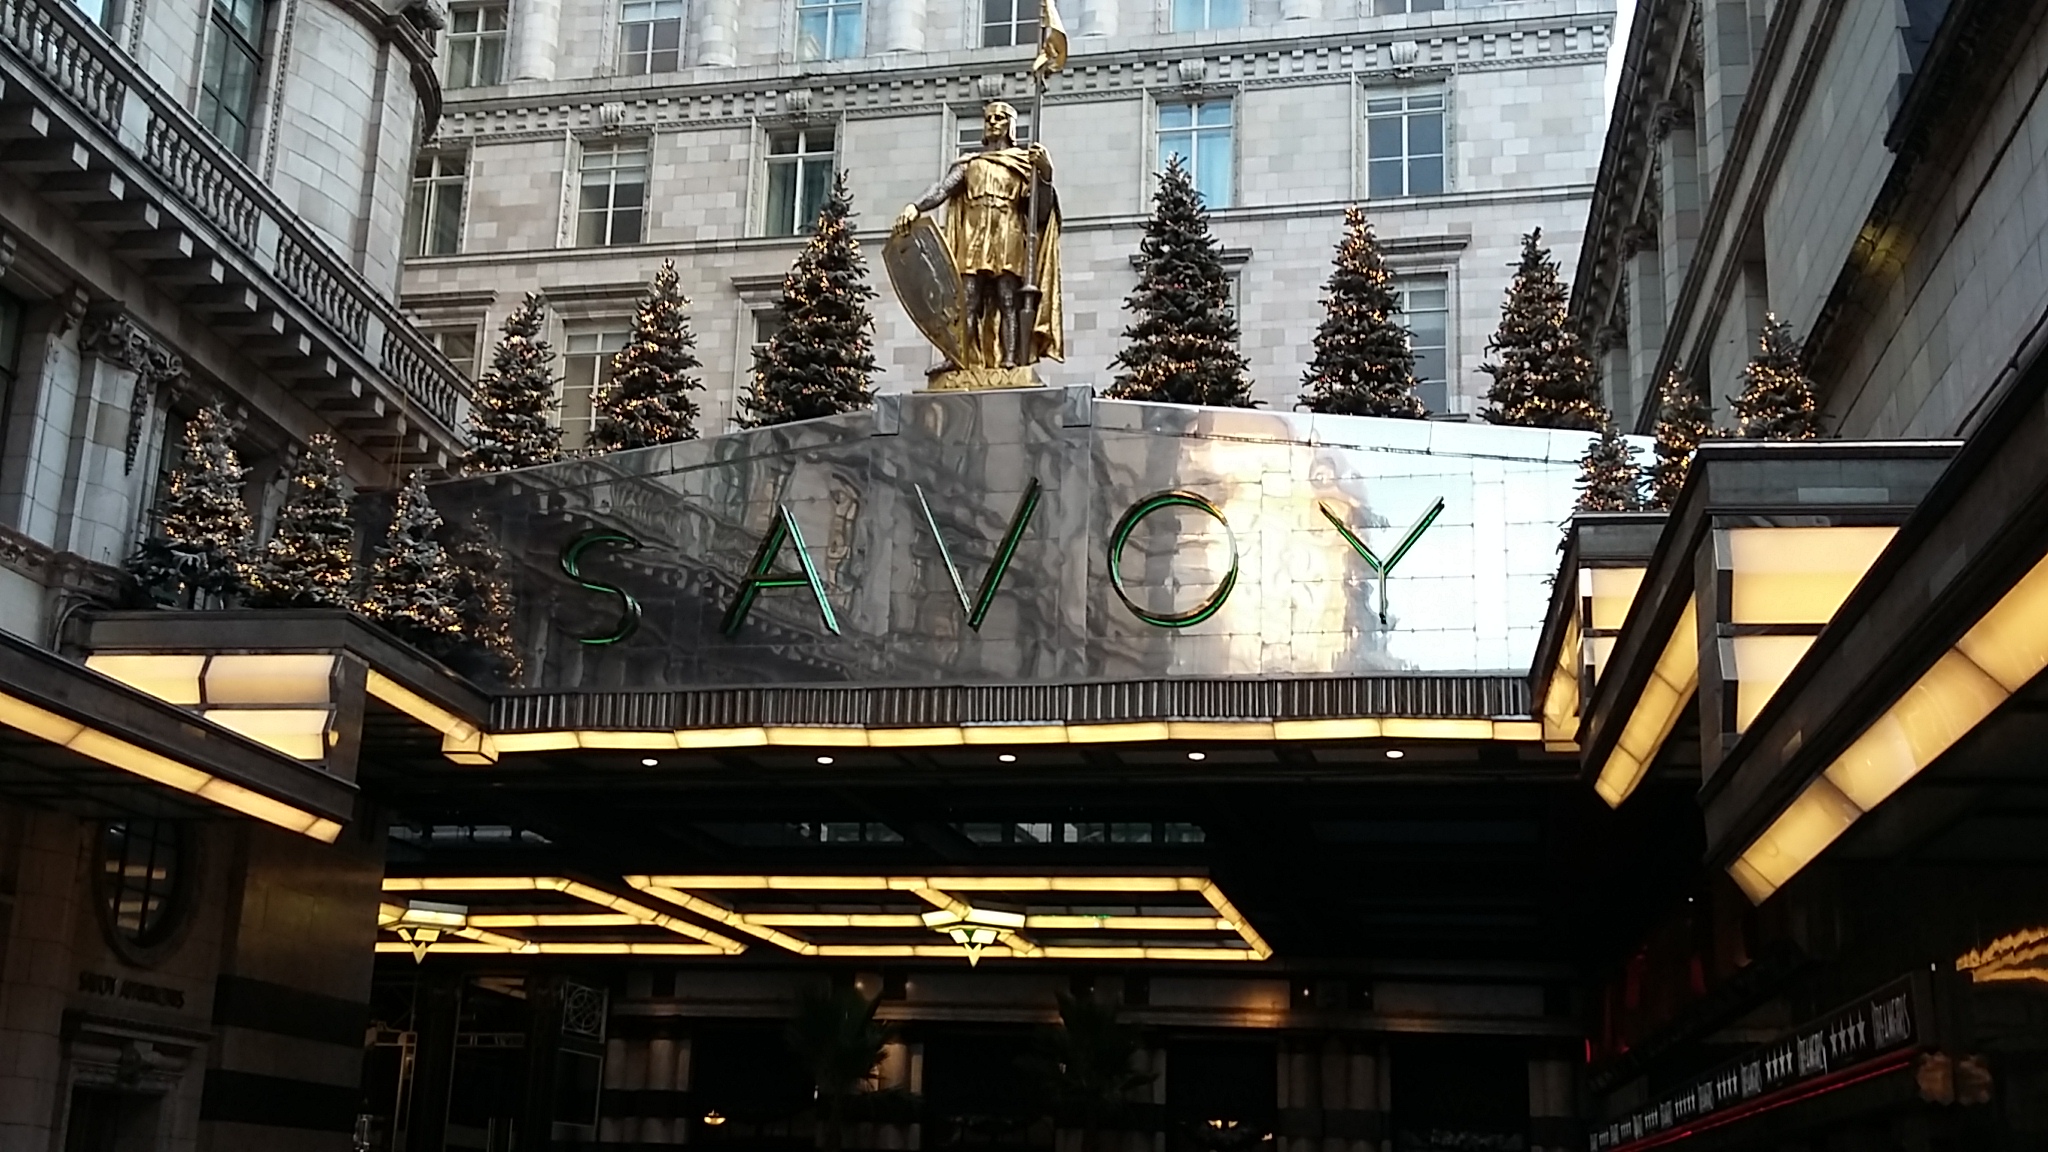 Gordon Ramsay’s Savoy Grill (Restaurant review) | What's Hot London?